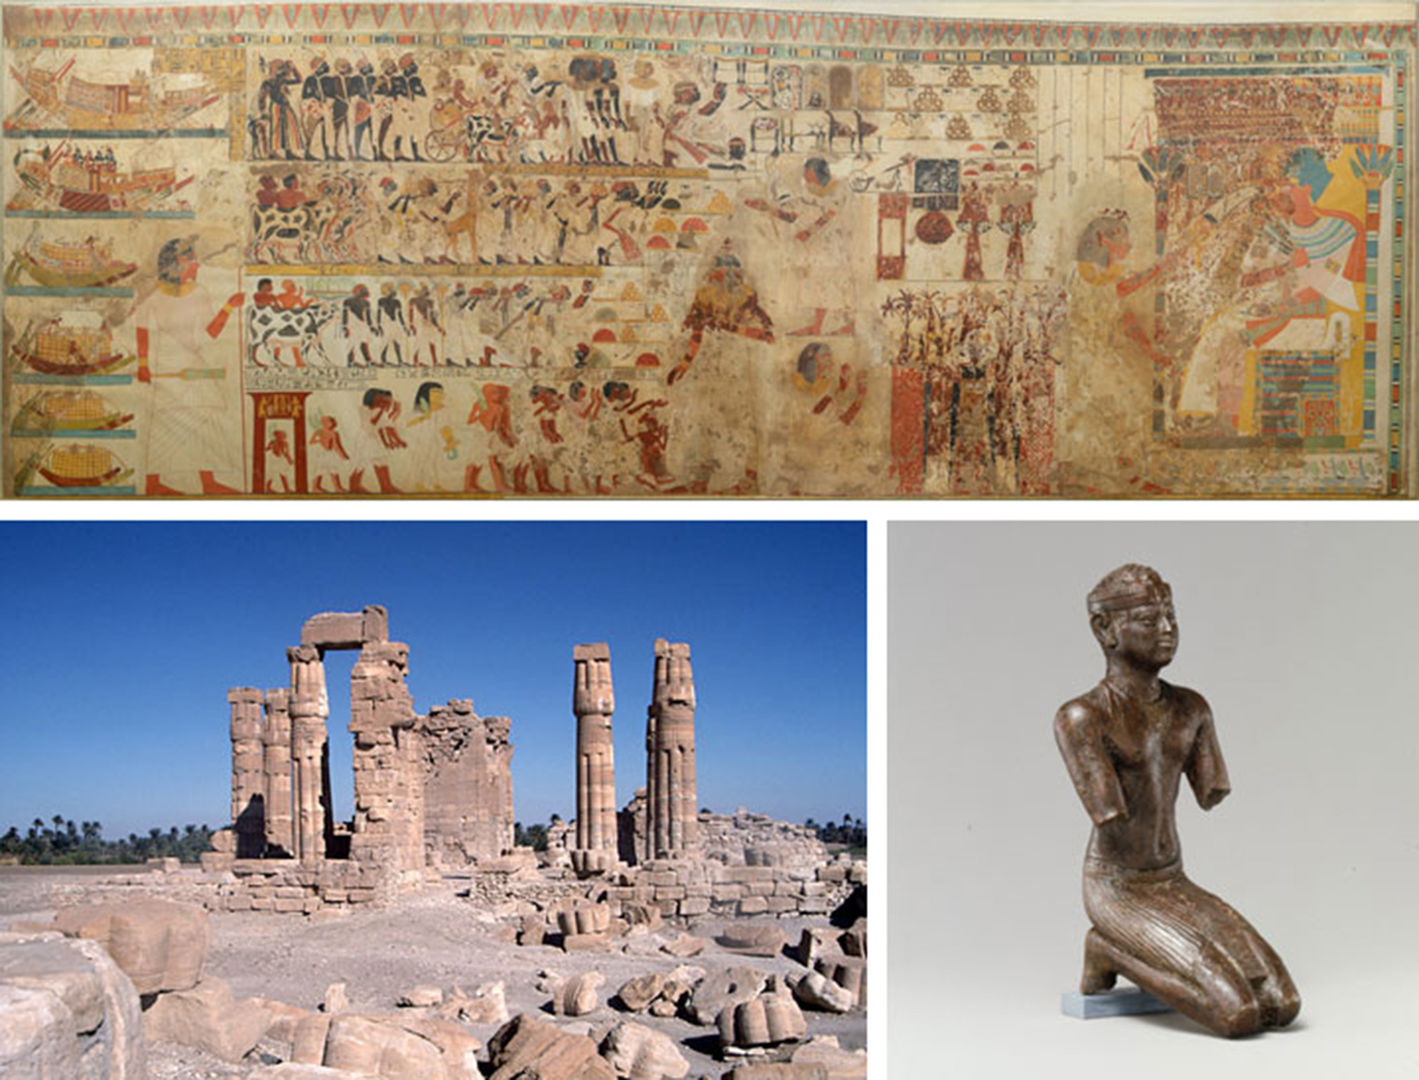 A composite image featuring a facsimile painting depicting Nubian tribute presented to a king, the temple of Soleb built by Amenhotep III (ca. 1390–1352 B.C.) in Upper Nubia, and a bronze figure of a kneeling Kushite pharaoh. 